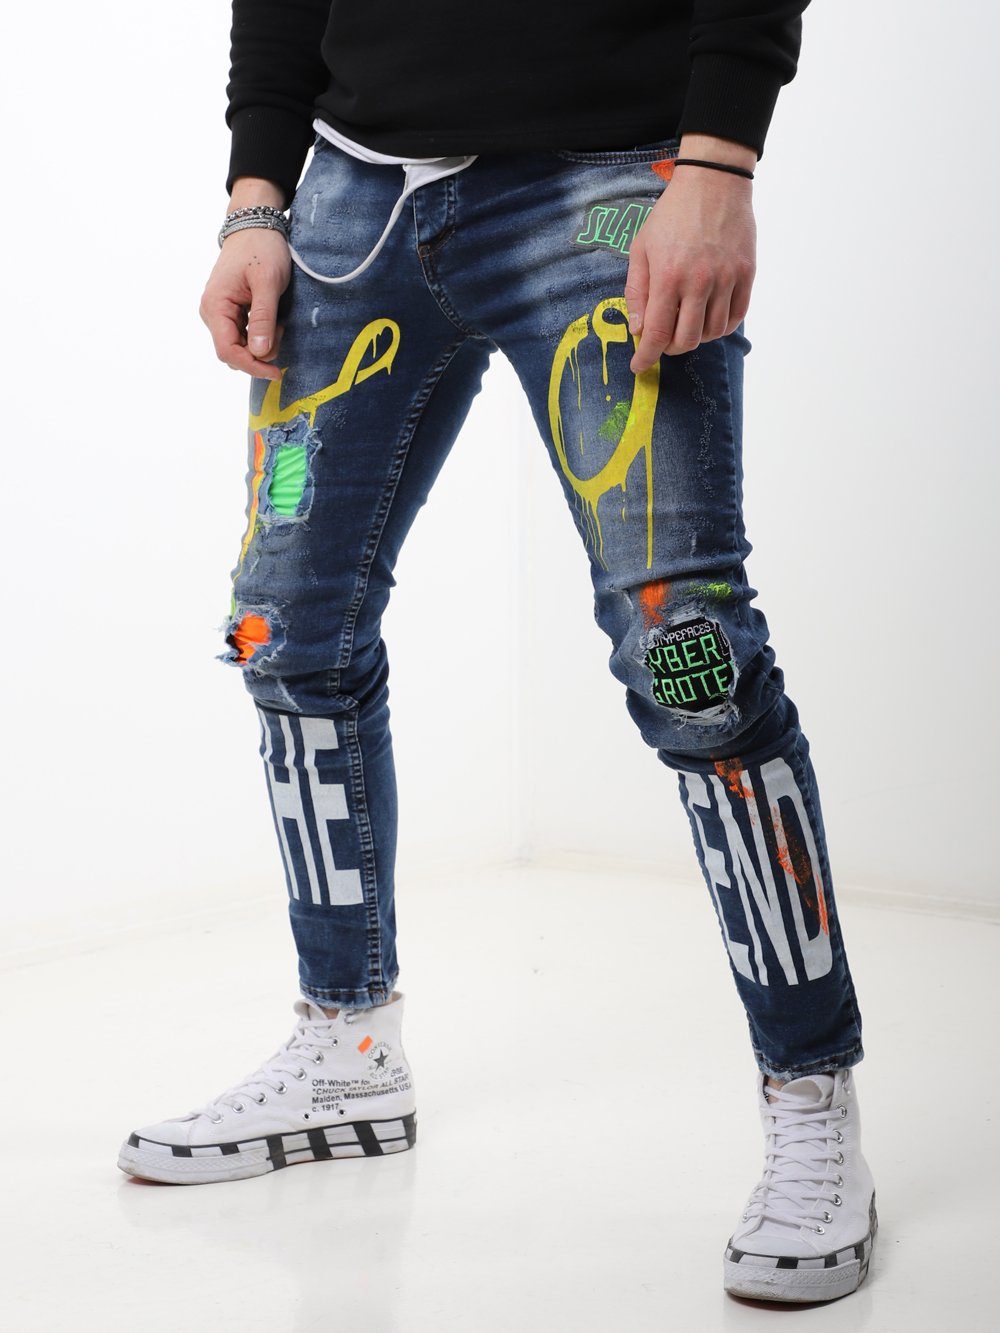 A man wearing a pair of MY WAY jeans with graffiti on them.